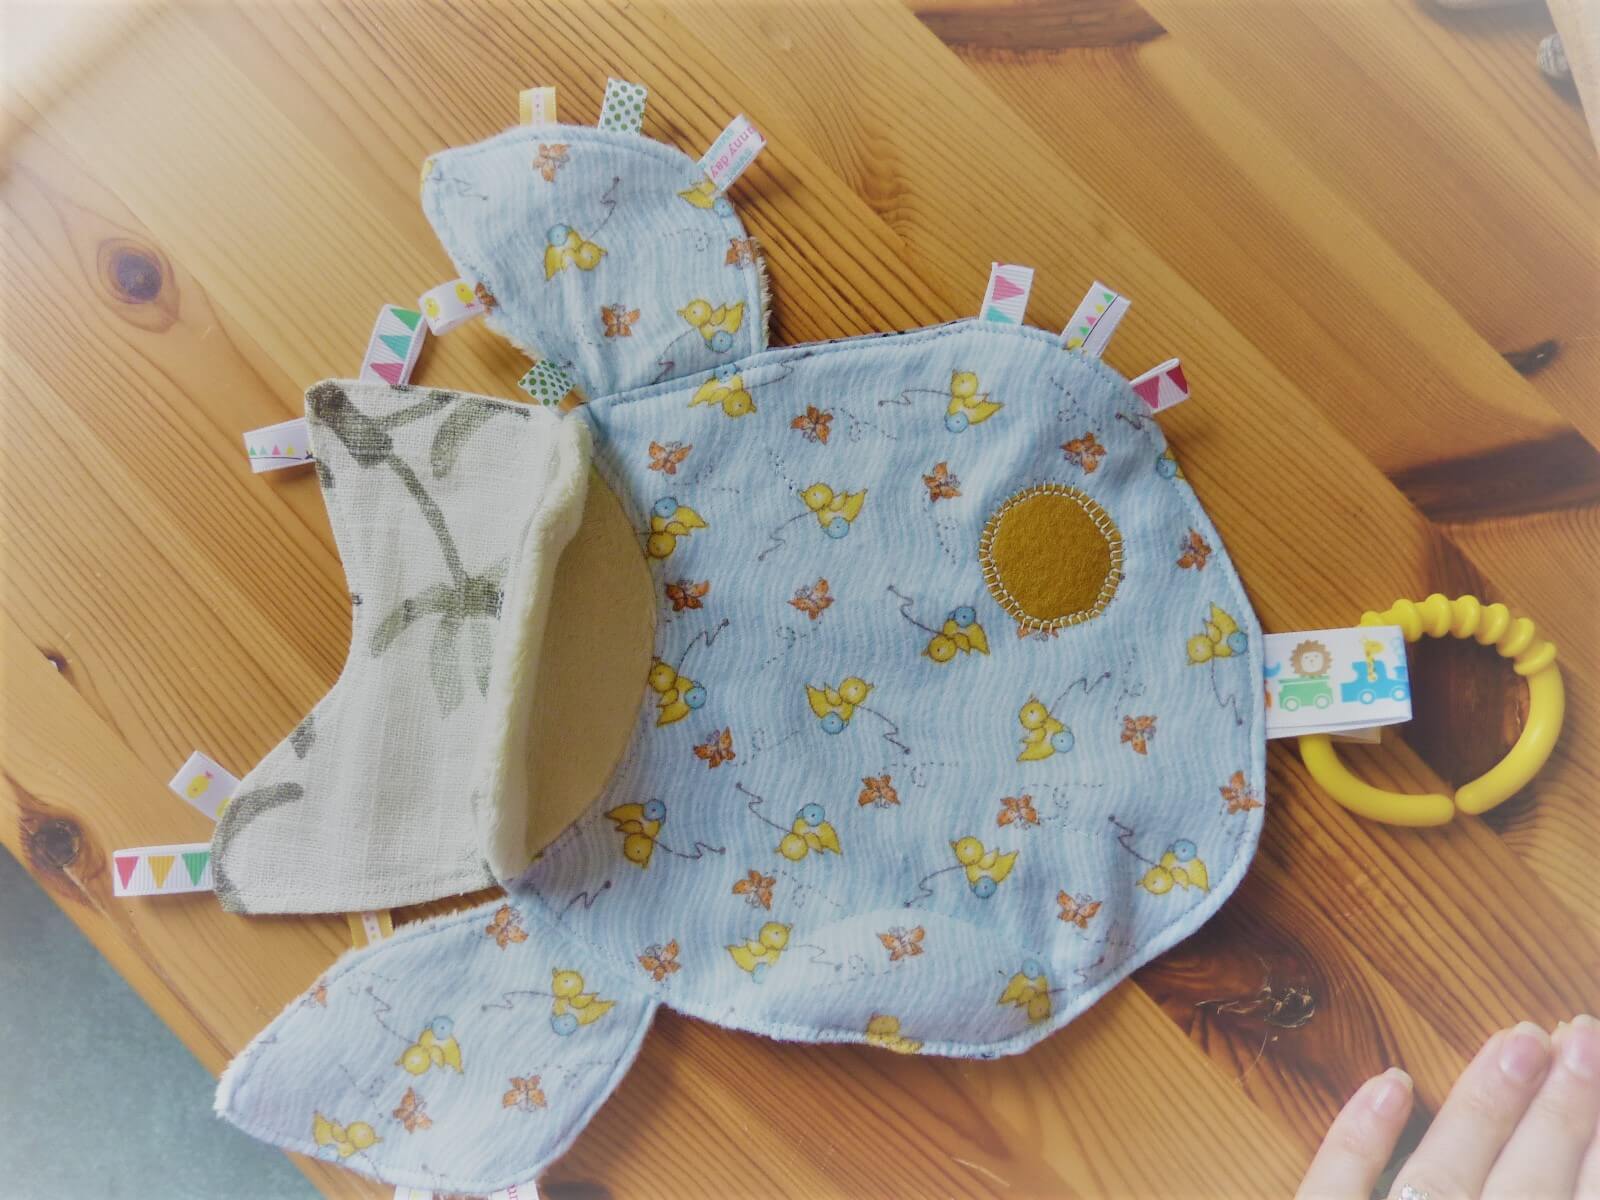 DIY for newborn baby: Things to make that will last